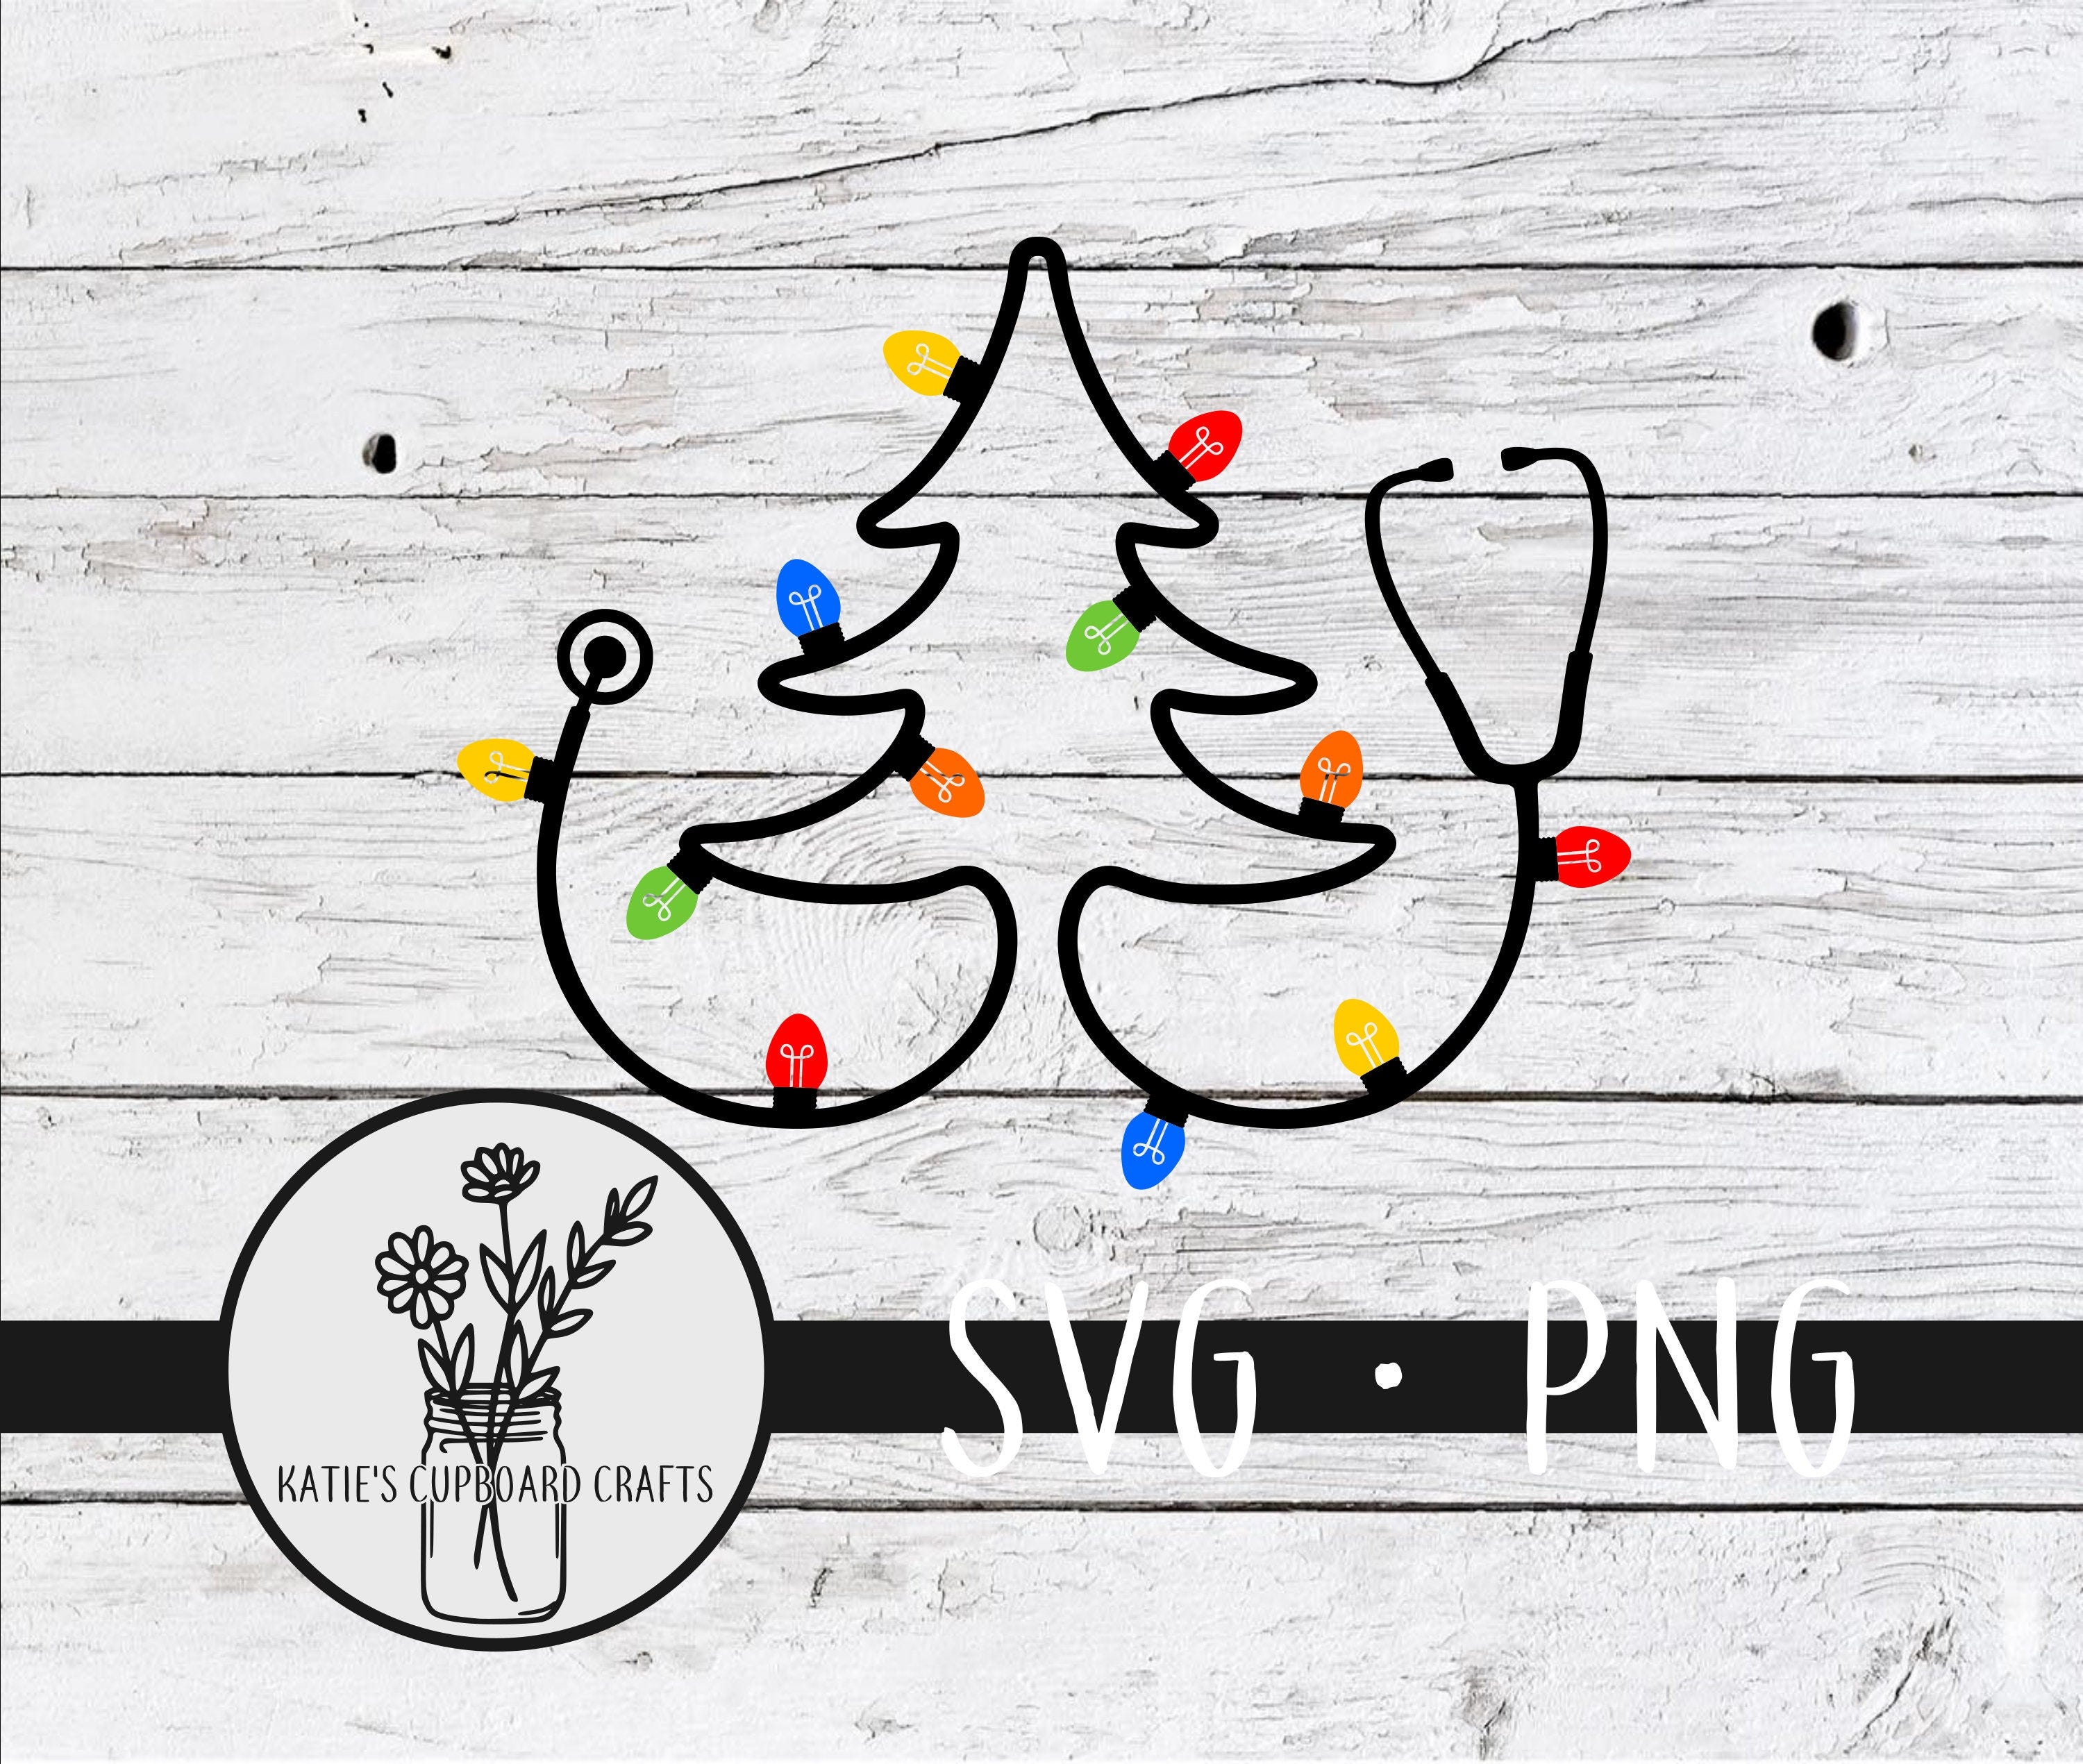 Stethoscope Christmas Tree with lights- SVG Cut File